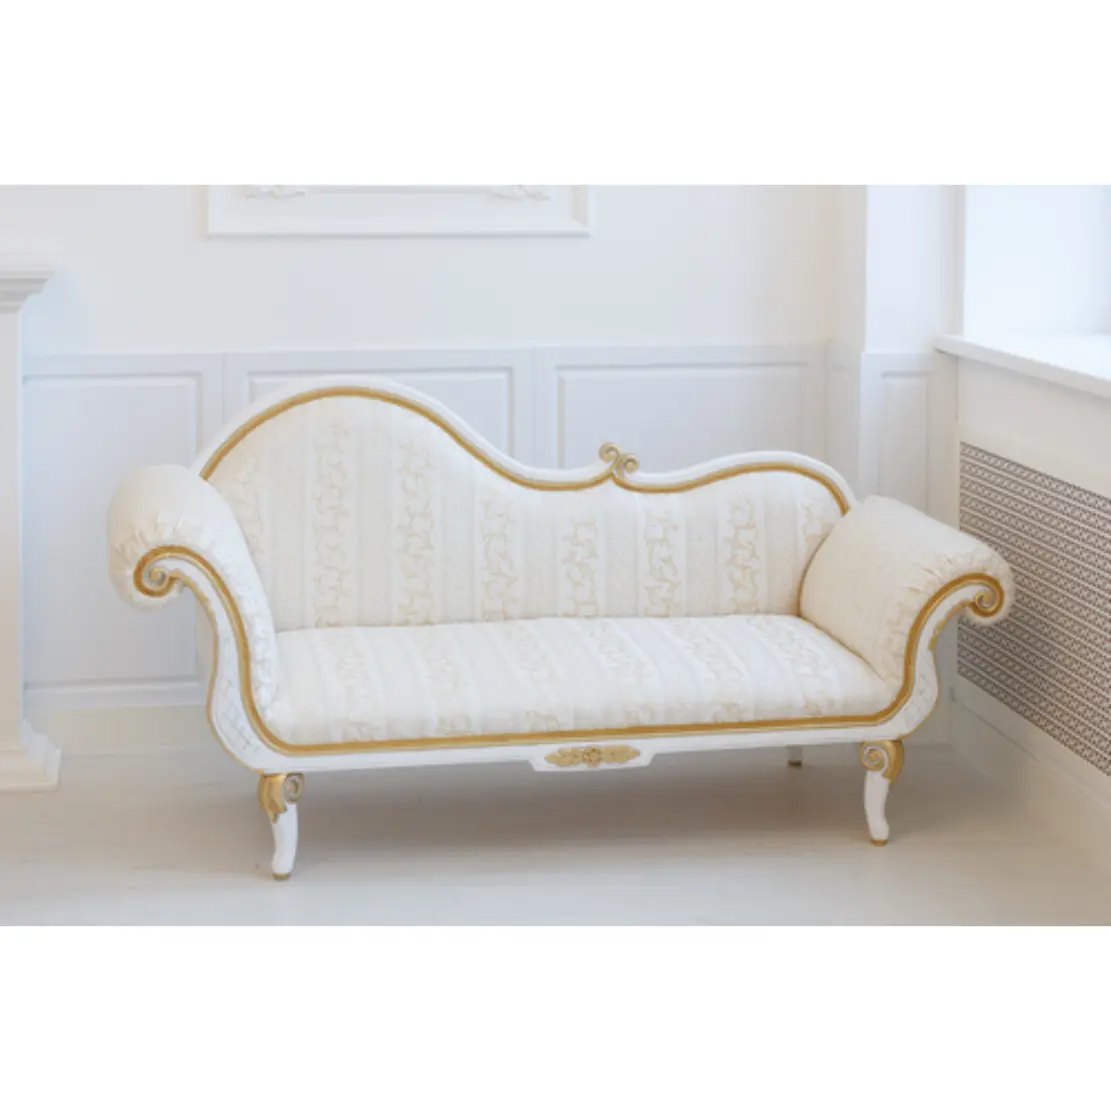 New Style Living Room Or Bedroom Luxury Royal Chaise Lounge Wood Wooden Best Seller Wholesale Cheap Furniture